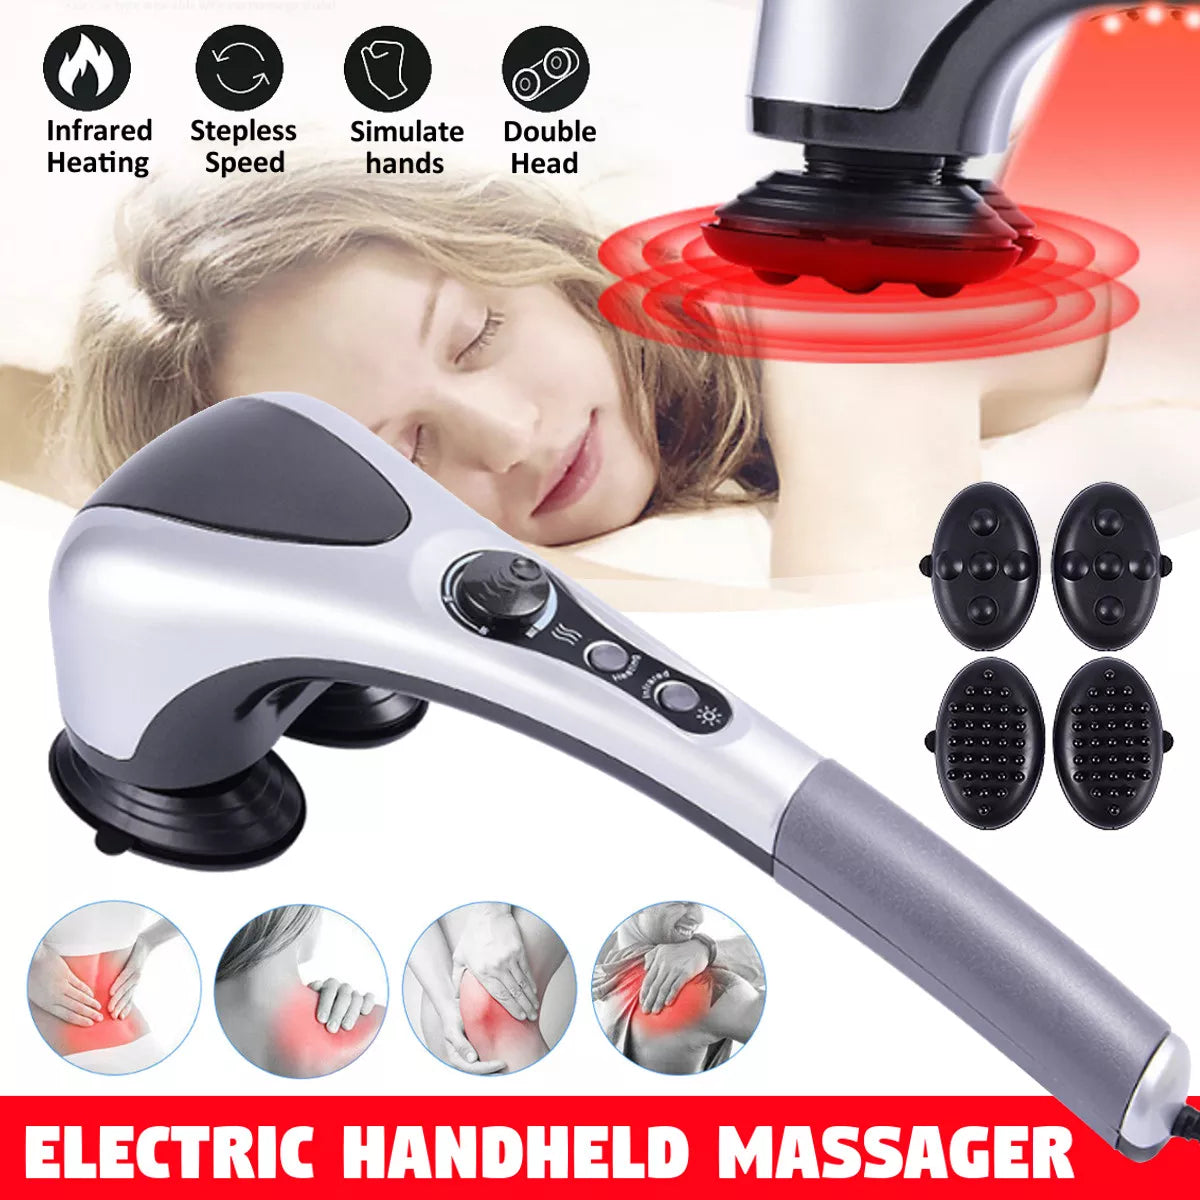 Double Head massager